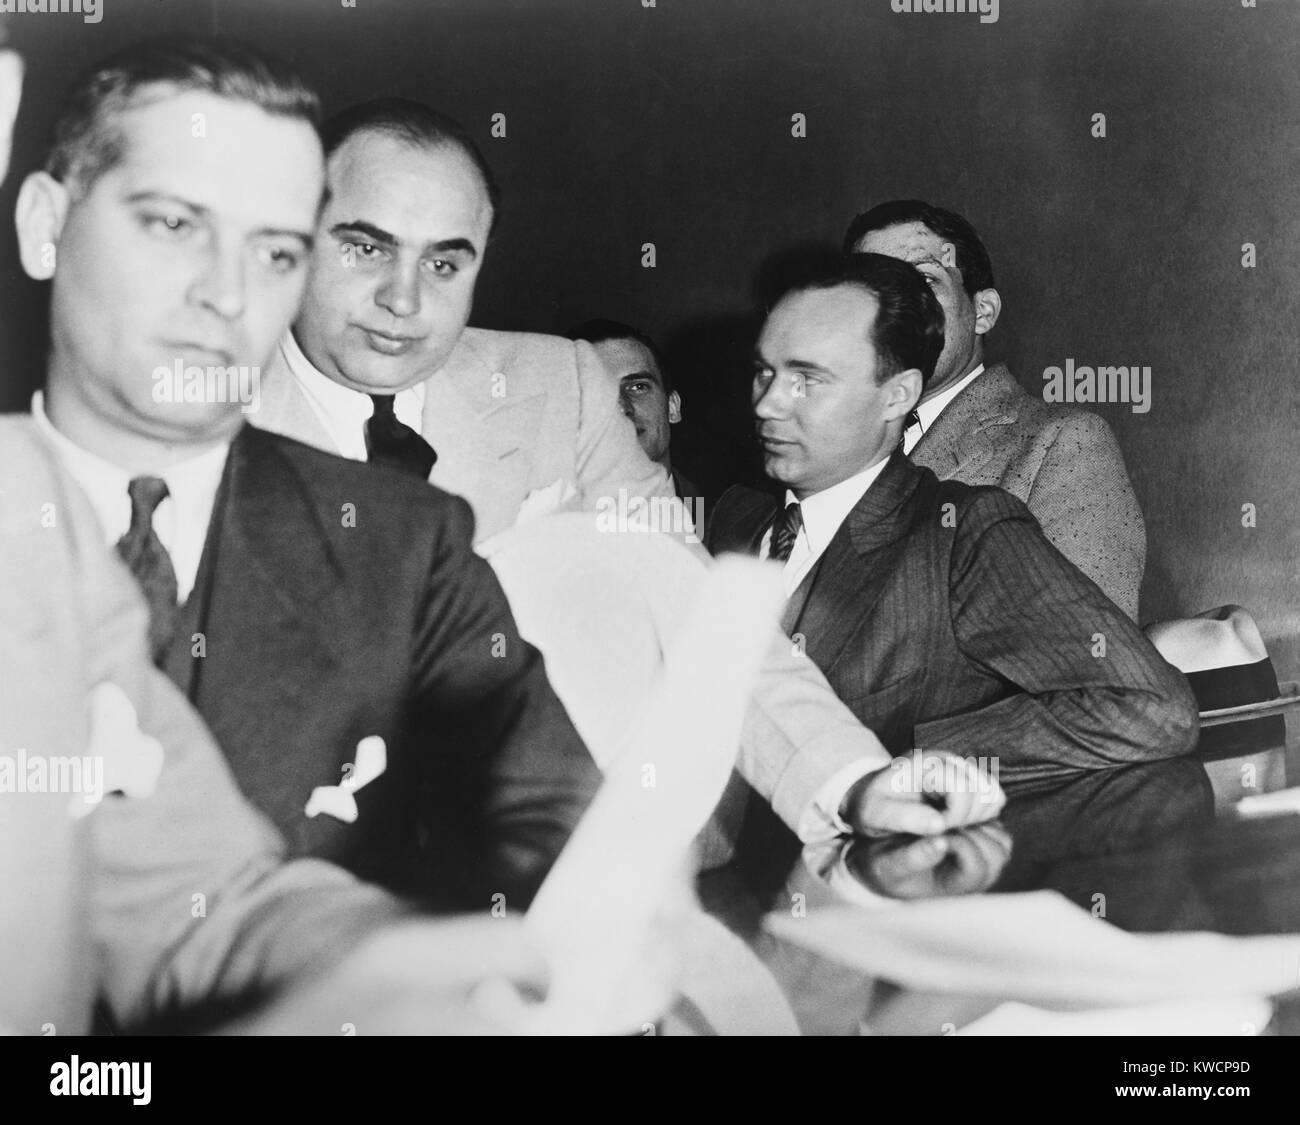 Al Capone, at the time of his indictment for tax evasion, June 5, 1931. At right is one of Capone's attorneys, Michael Ahern. - (BSLOC 2015 1 12) Stock Photo